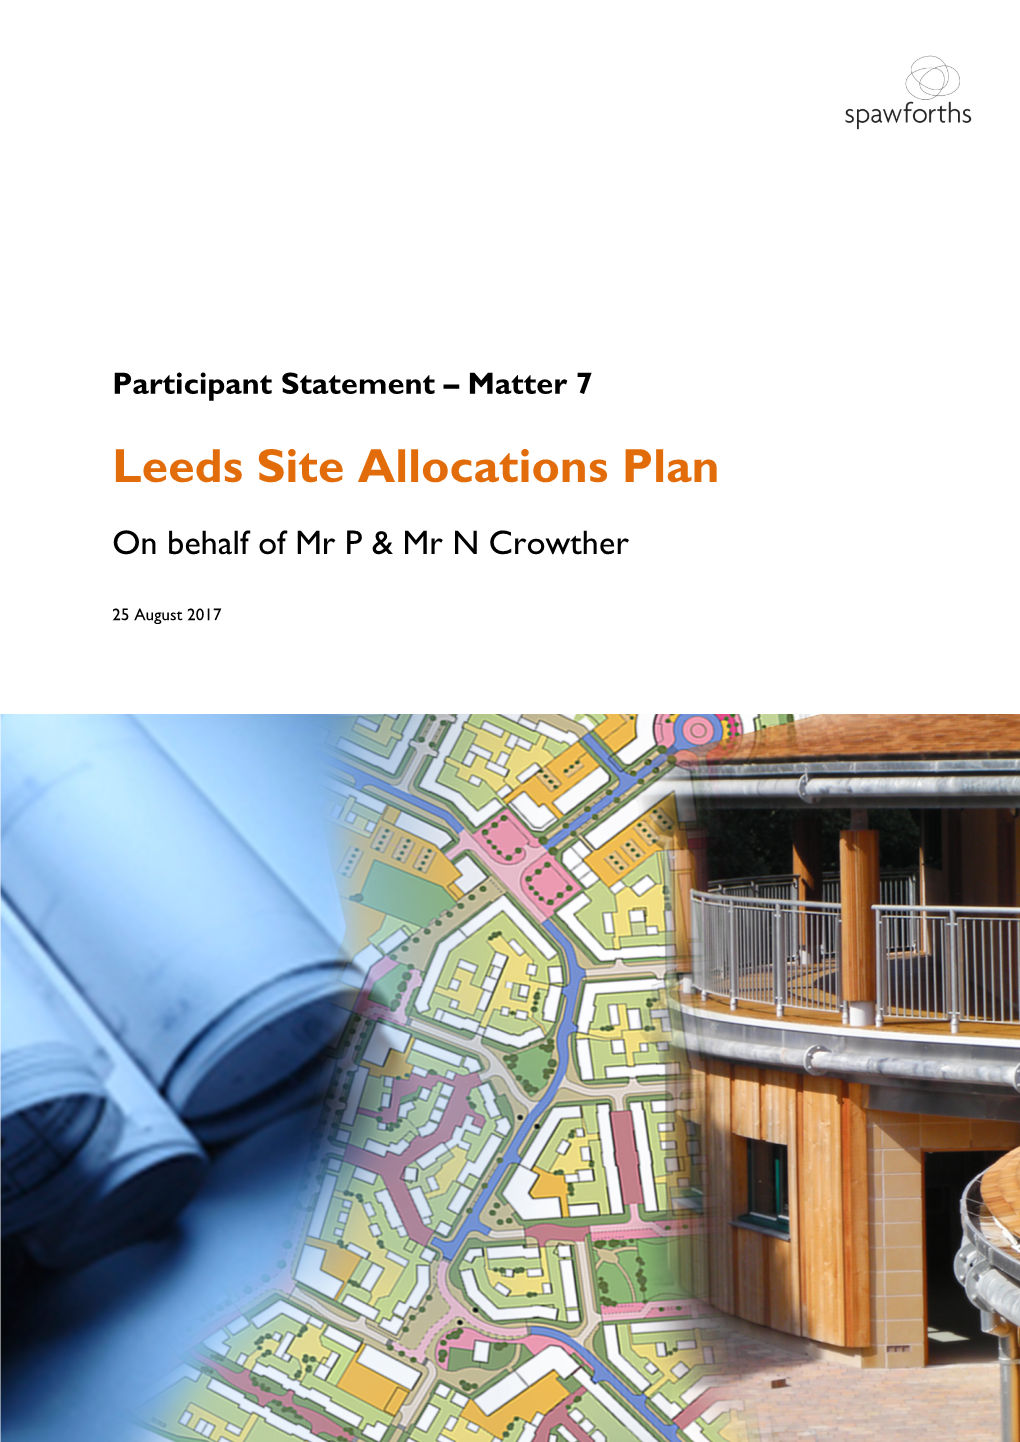 Participant Statement – Matter 7 Leeds Site Allocations Plan on Behalf of Mr P & Mr N Crowther